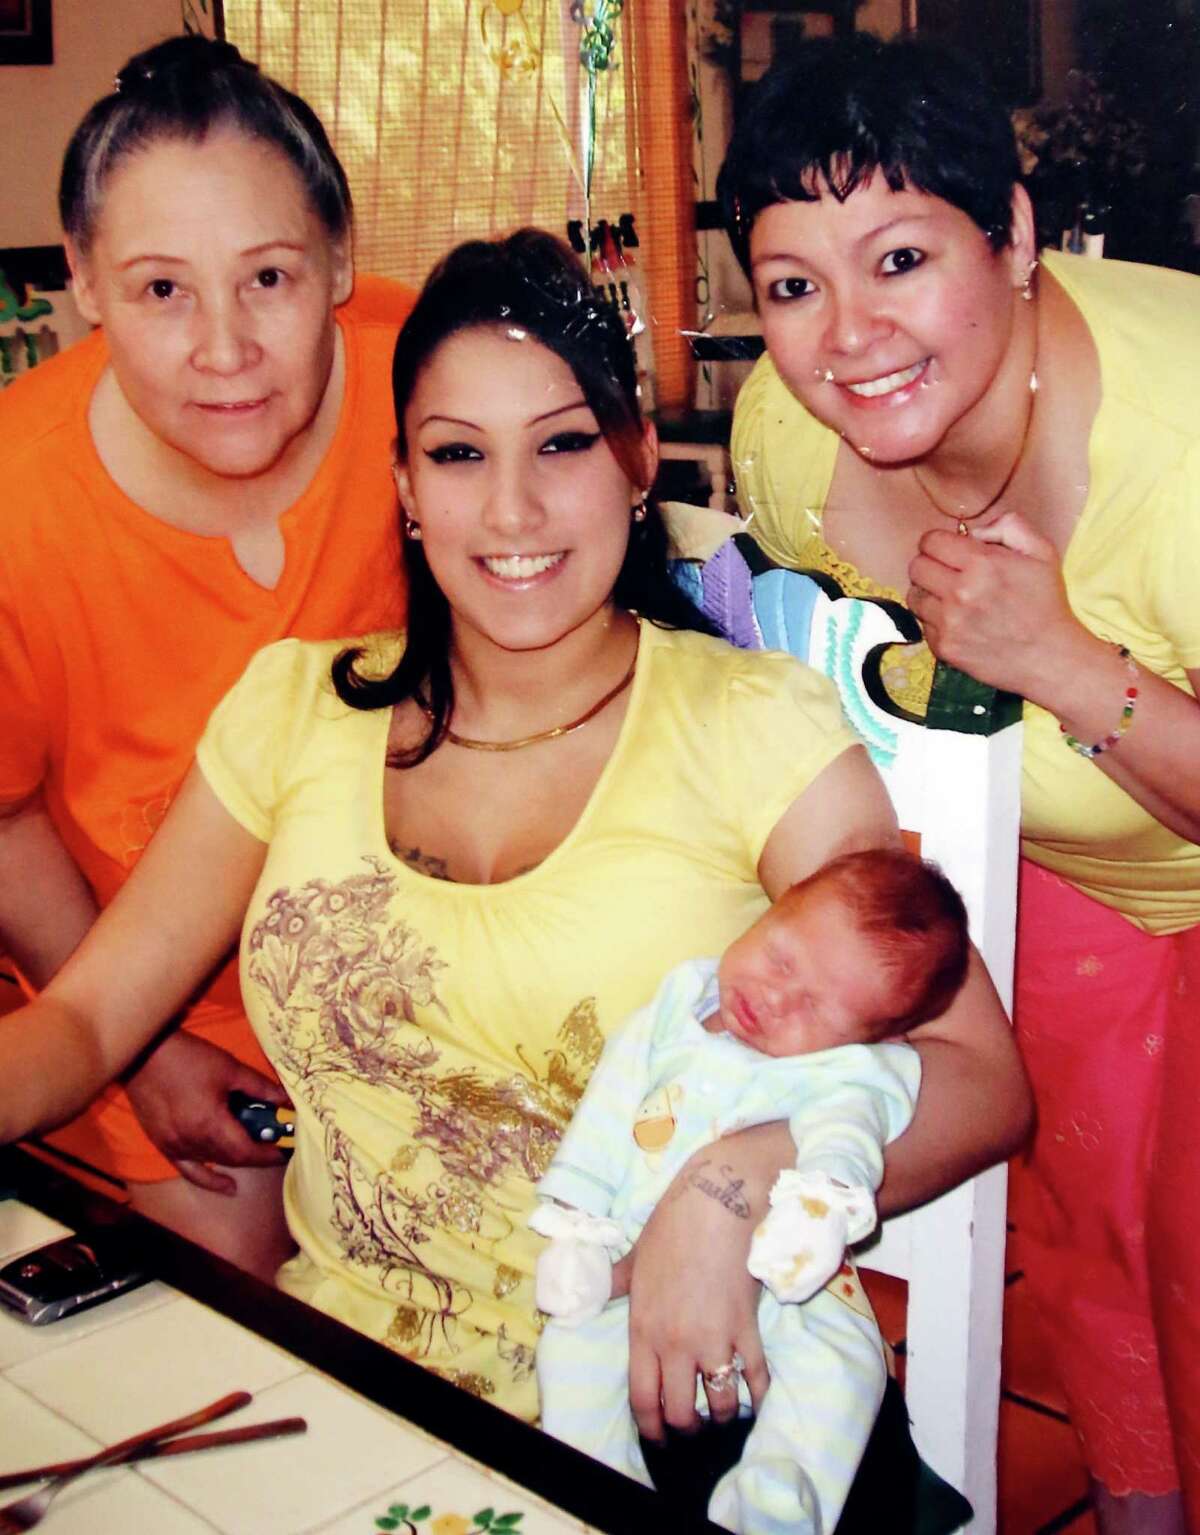 In a family photo, Mandi Garza is shown holding her son, Noah Garza, when he was an infant. Beside her is her mother Jean Limon (left) and sister Rita Barrientos. Mandi Garza was killed in July 2014 in a crash caused by a drunken driver.